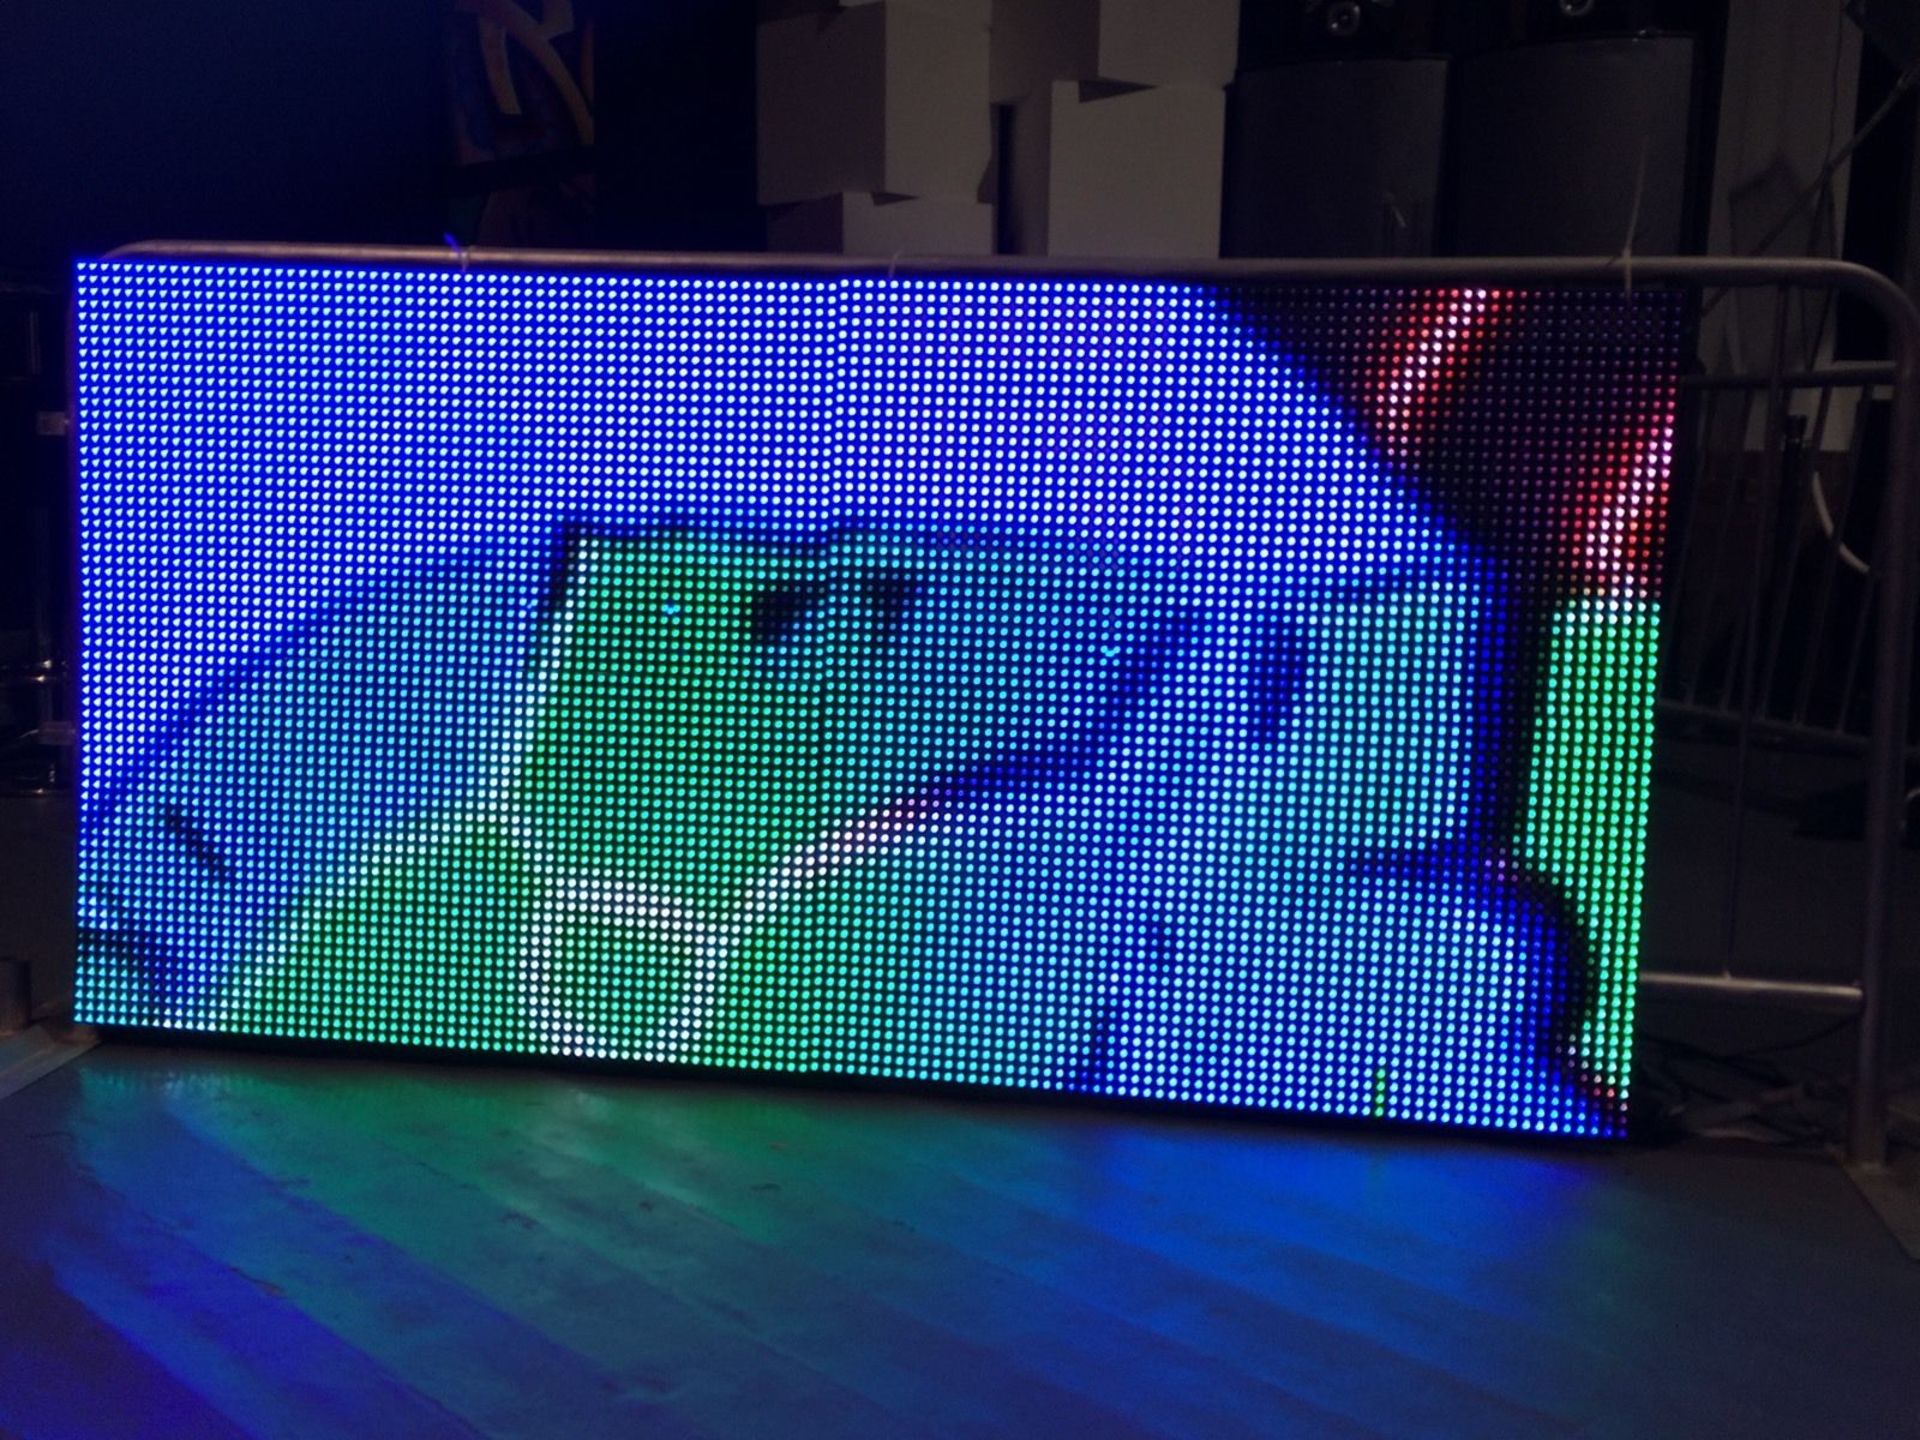 2M X 1M Full Colour P16 Led Video Wall Videowall Screen For Wedding Dj Club Made Up Fo 4X Panels. - Image 4 of 12